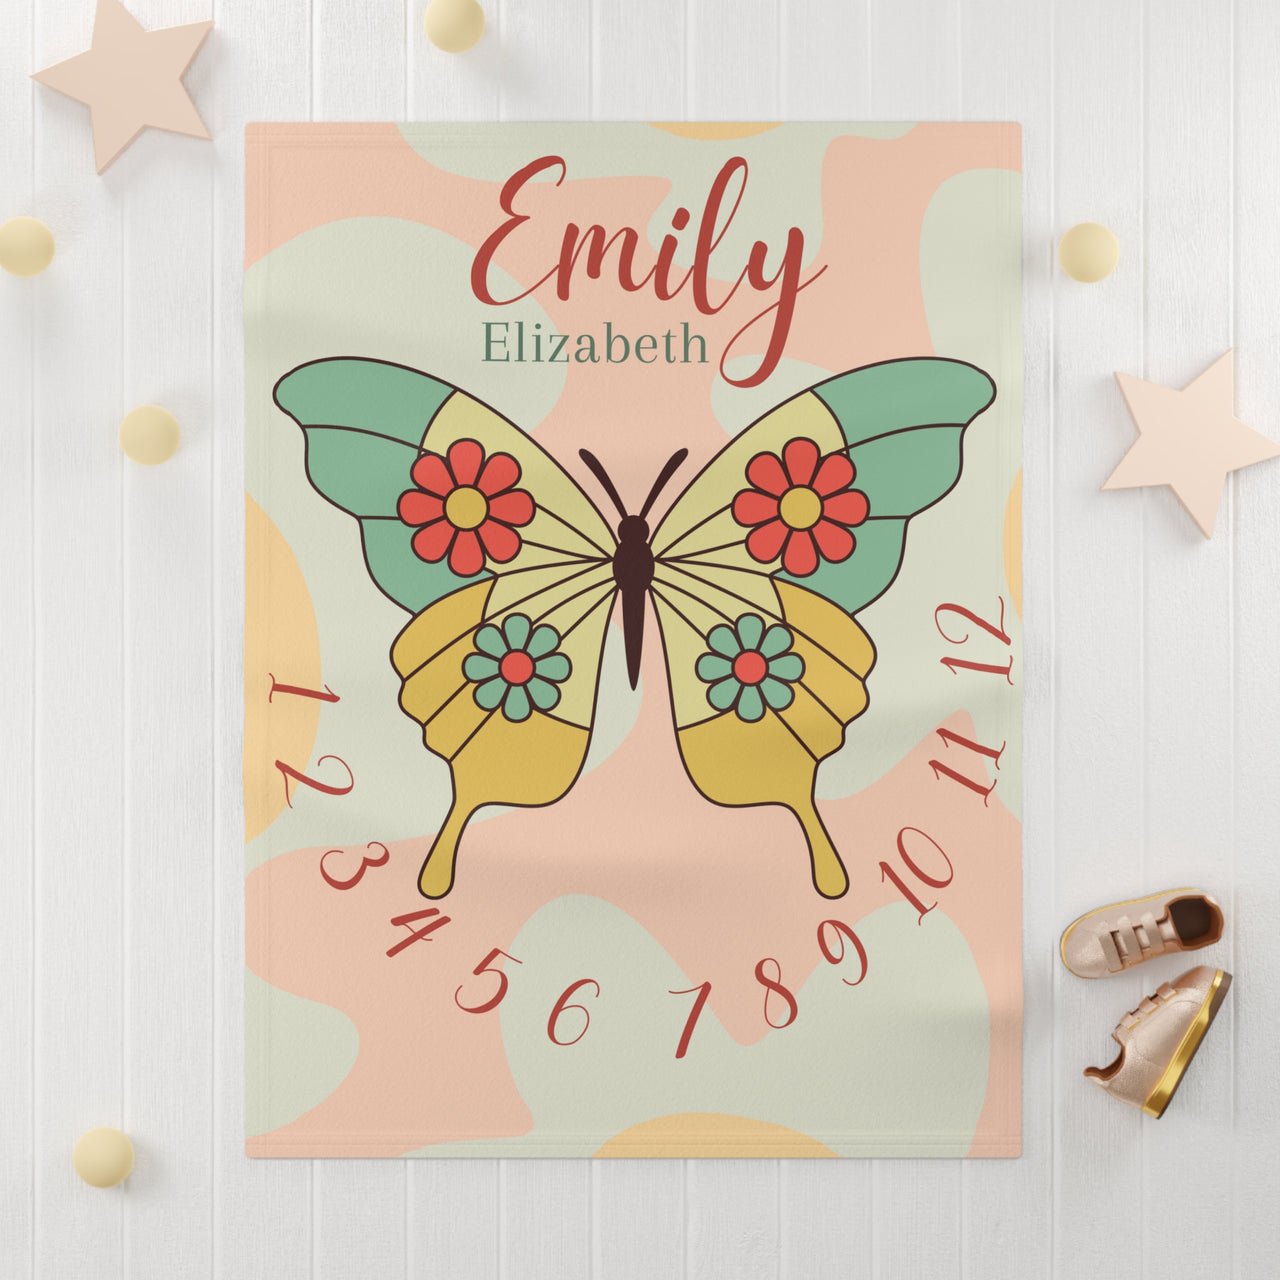 Retro Butterfly Themed Soft Fleece Milestone Blanket, Boys Monthly Growth Tracker, Personalized Baby Blanket, Baby Shower Gift